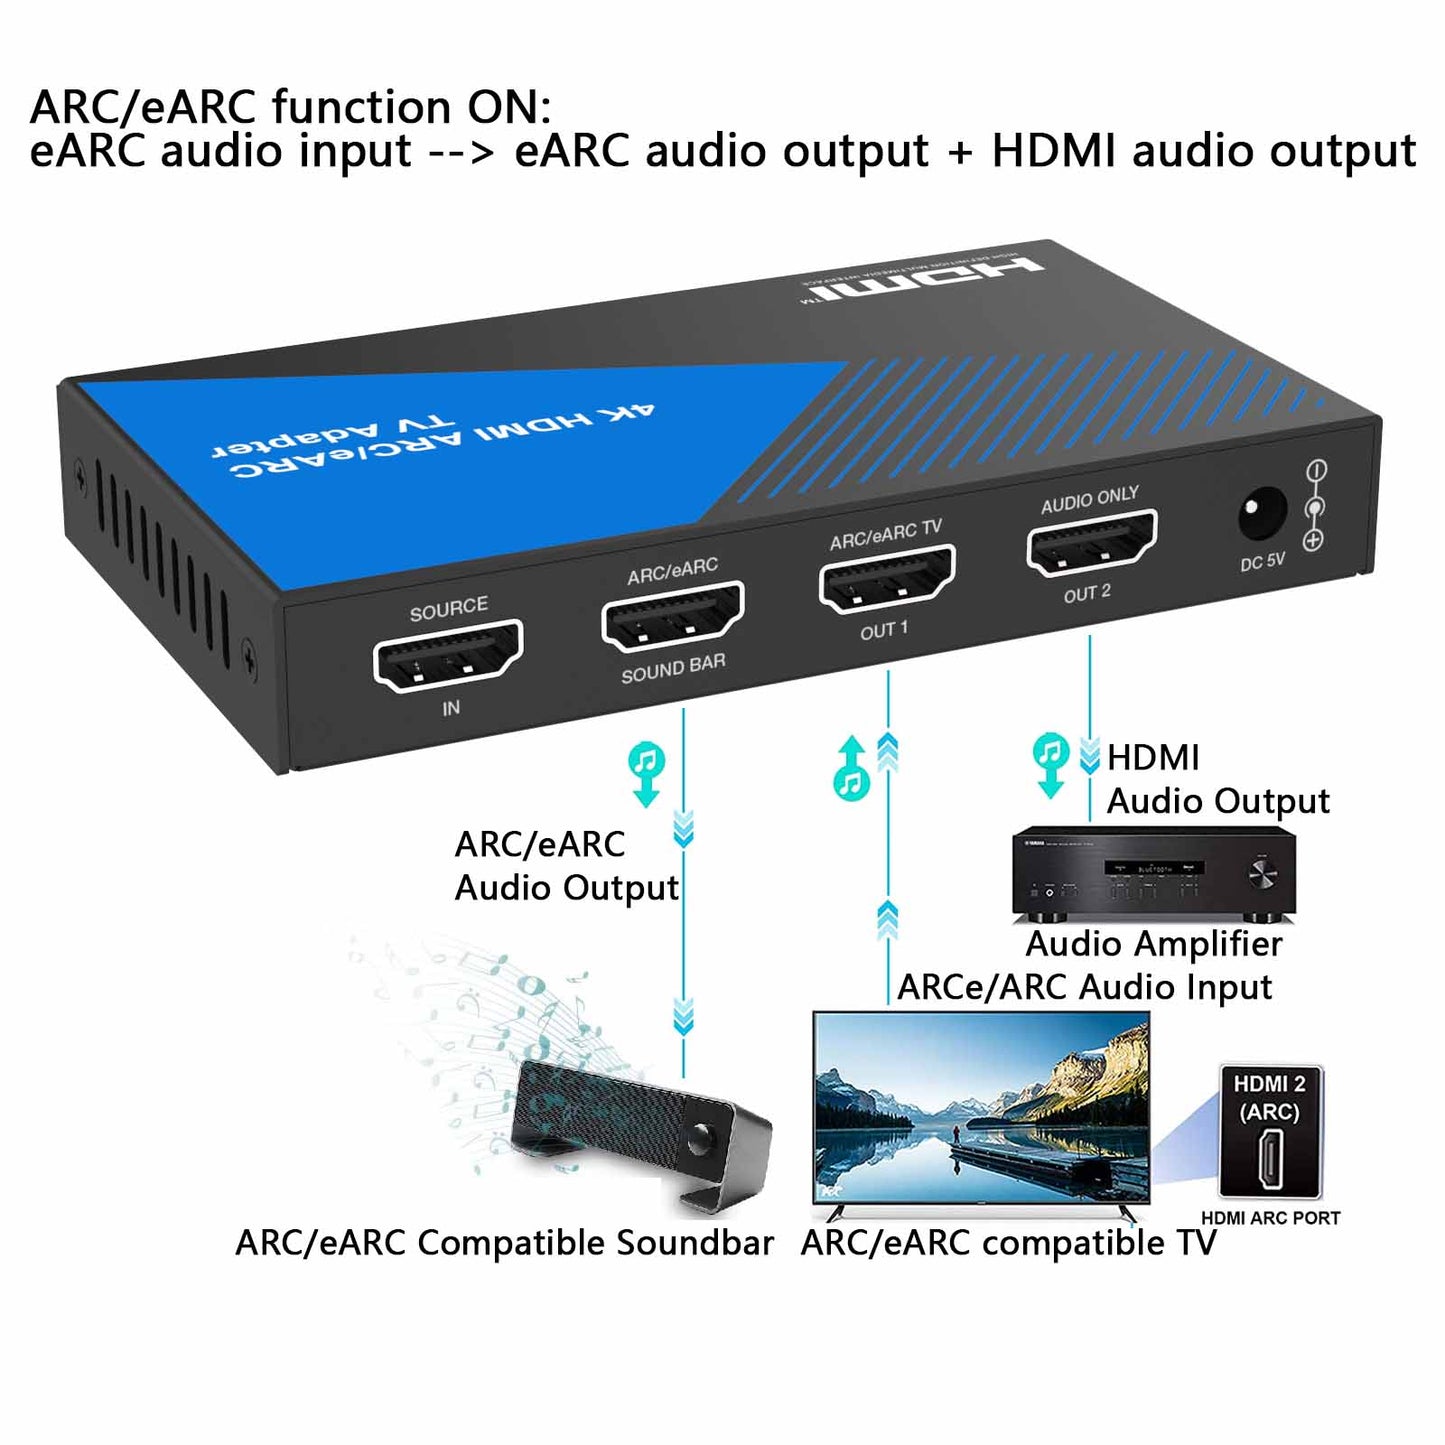 4K HDMI ARC/eARC Audio Adapter Converter eARC ON connection